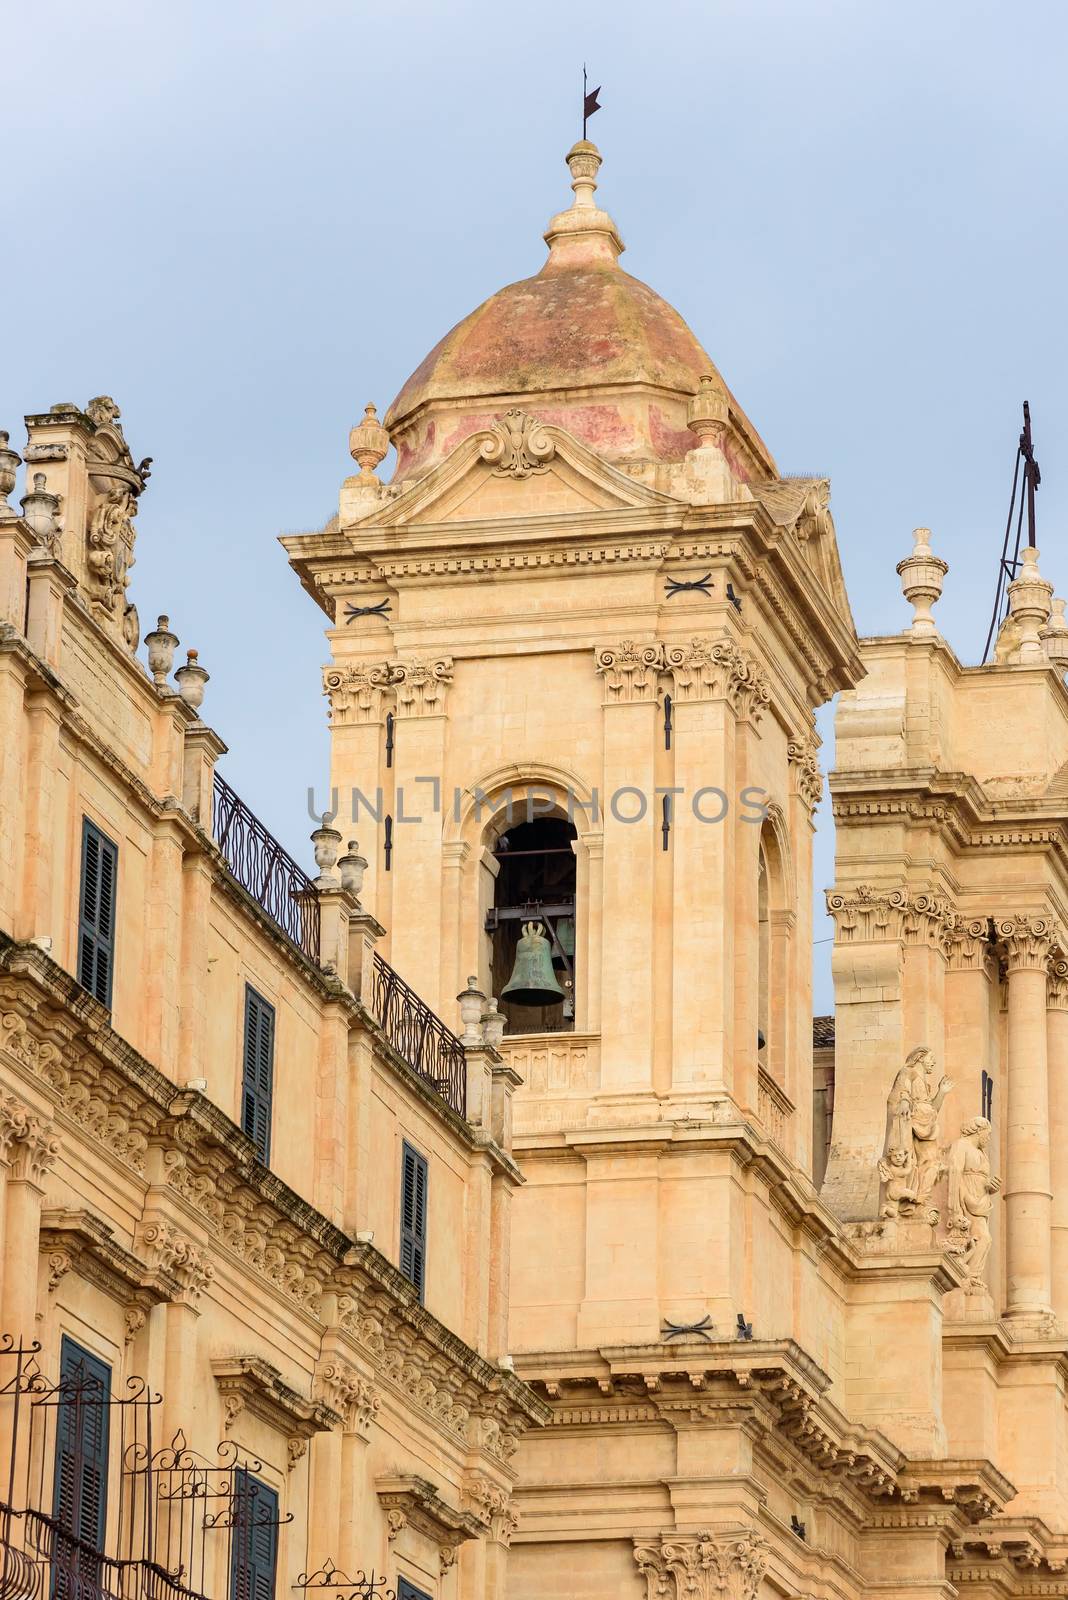 Belltower of the Cathedral of Noto by mkos83